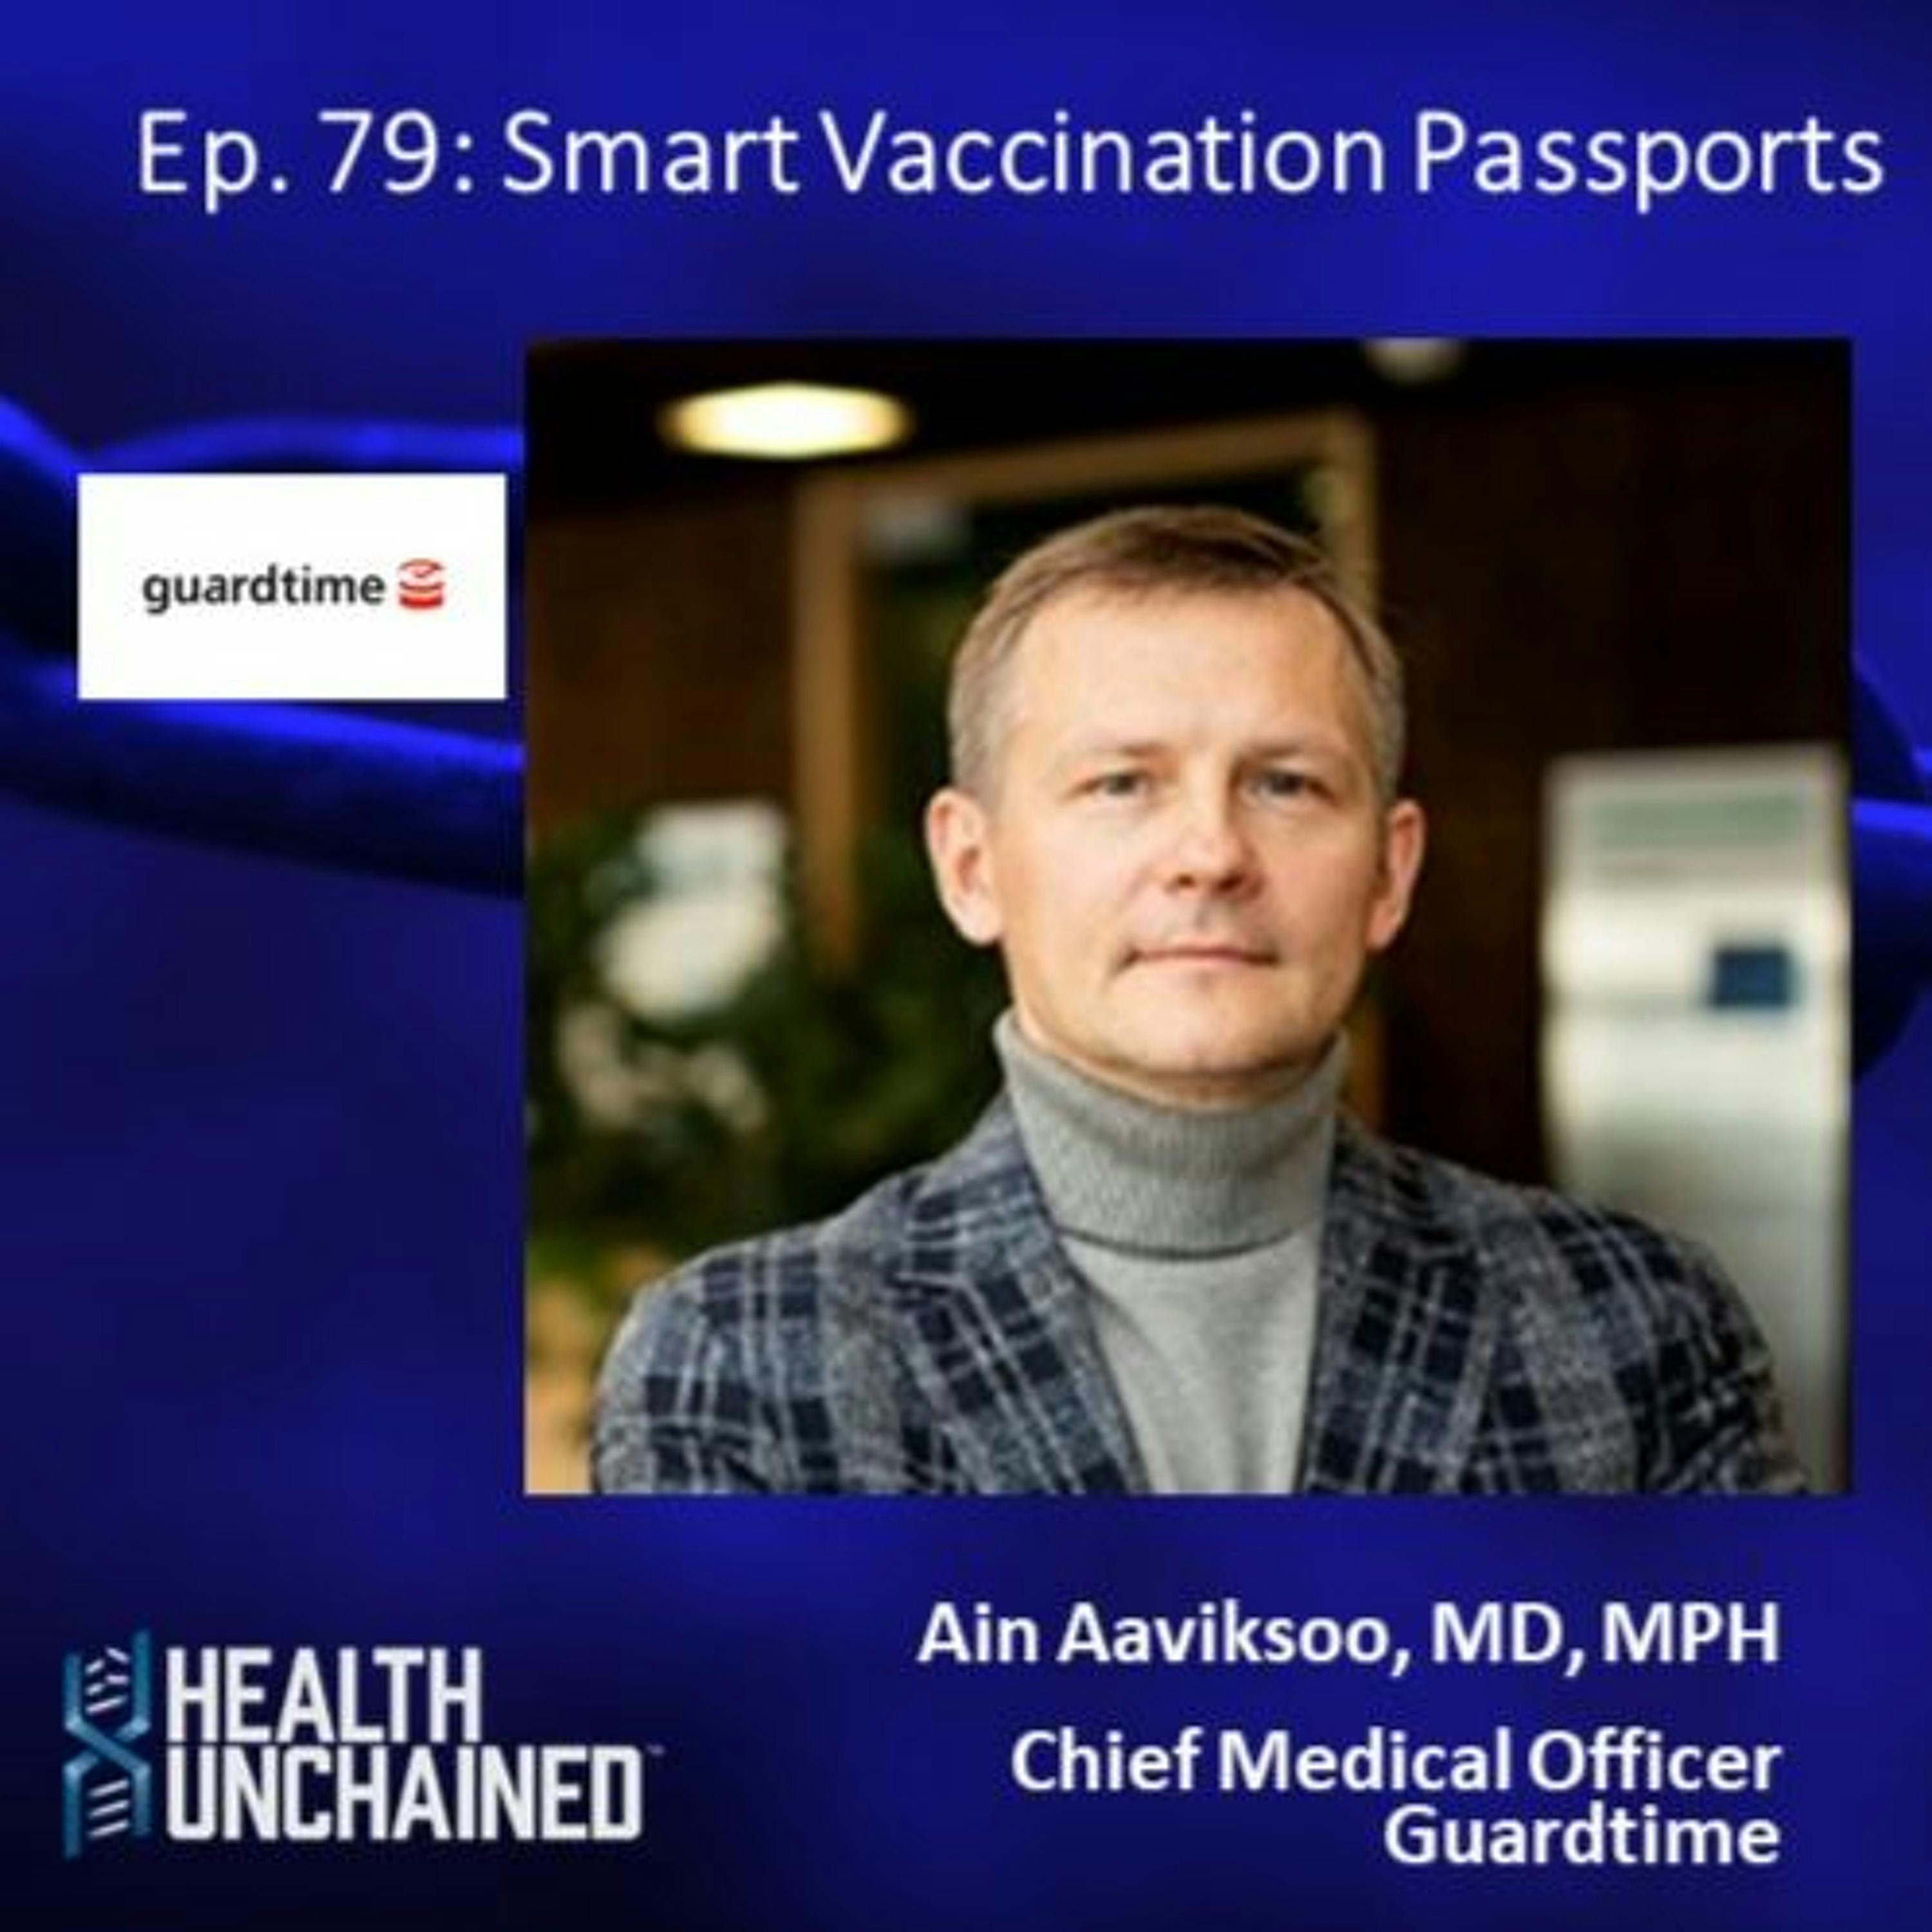 Ep. 79: Smart Vaccination Passports – Ain Aaviksoo, MD, MPH (CMO Guardtime)